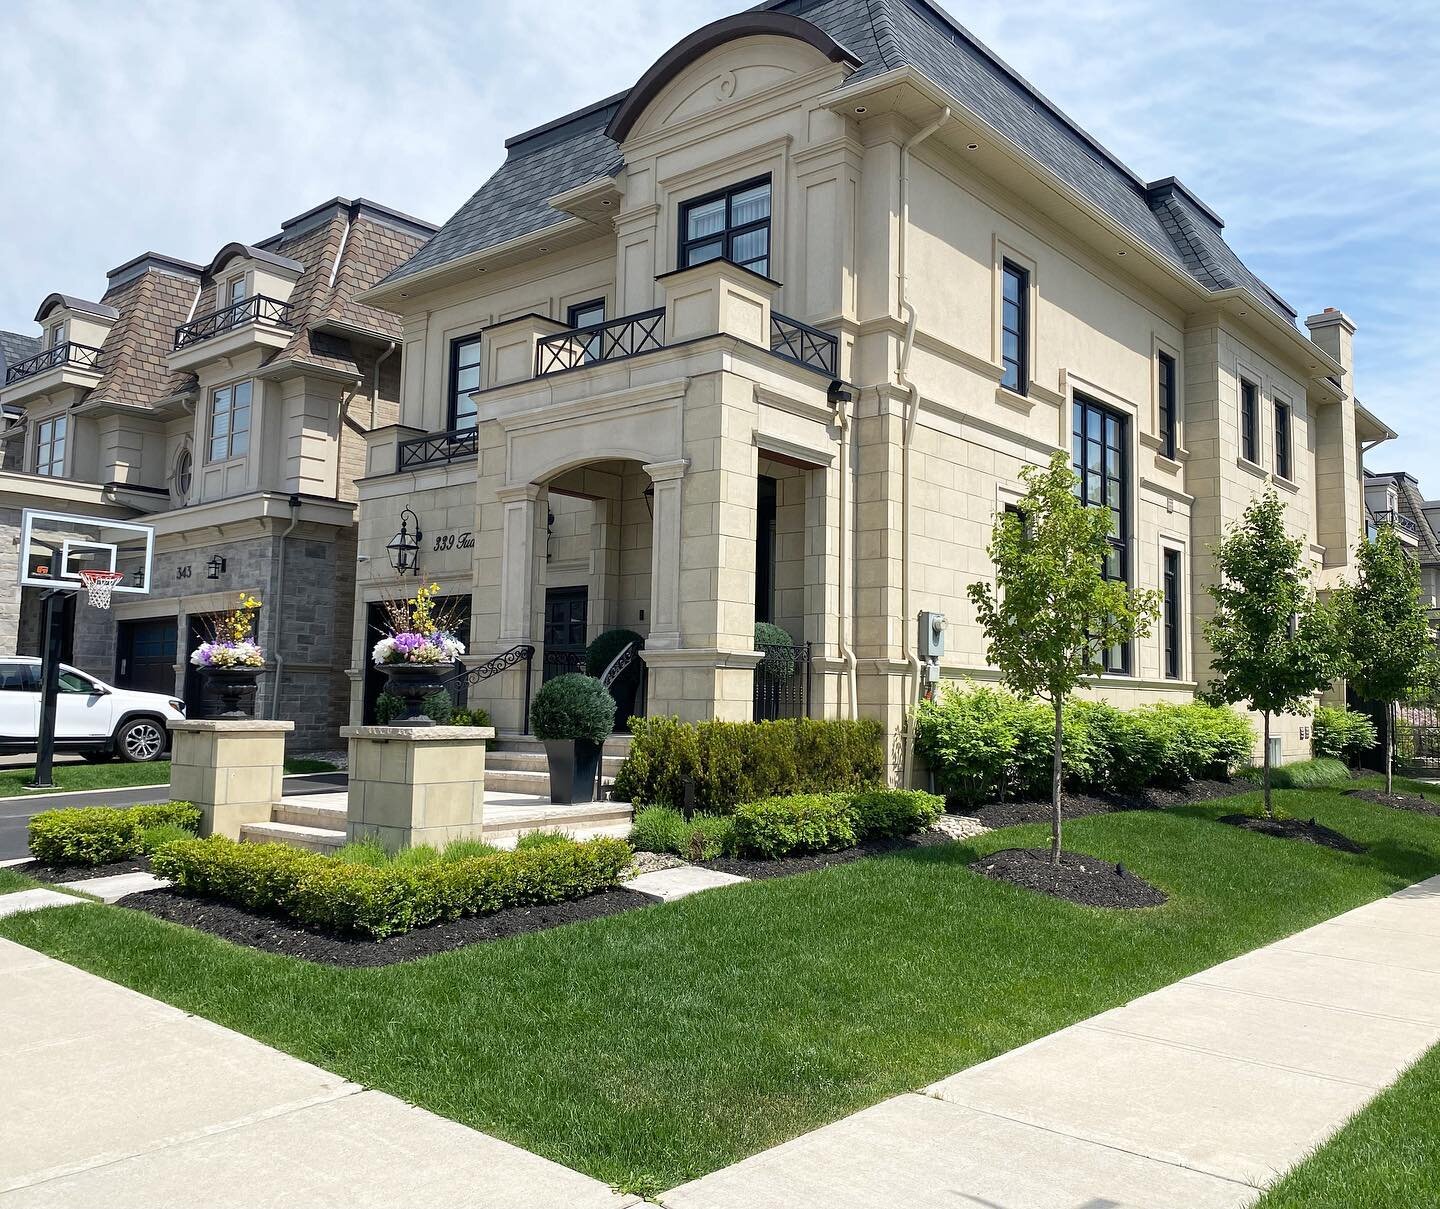 This Oakville property drives home the importance of connecting it&rsquo;s architecture and landscape. #limestone #landscapearchitecture #landscapeconstruction